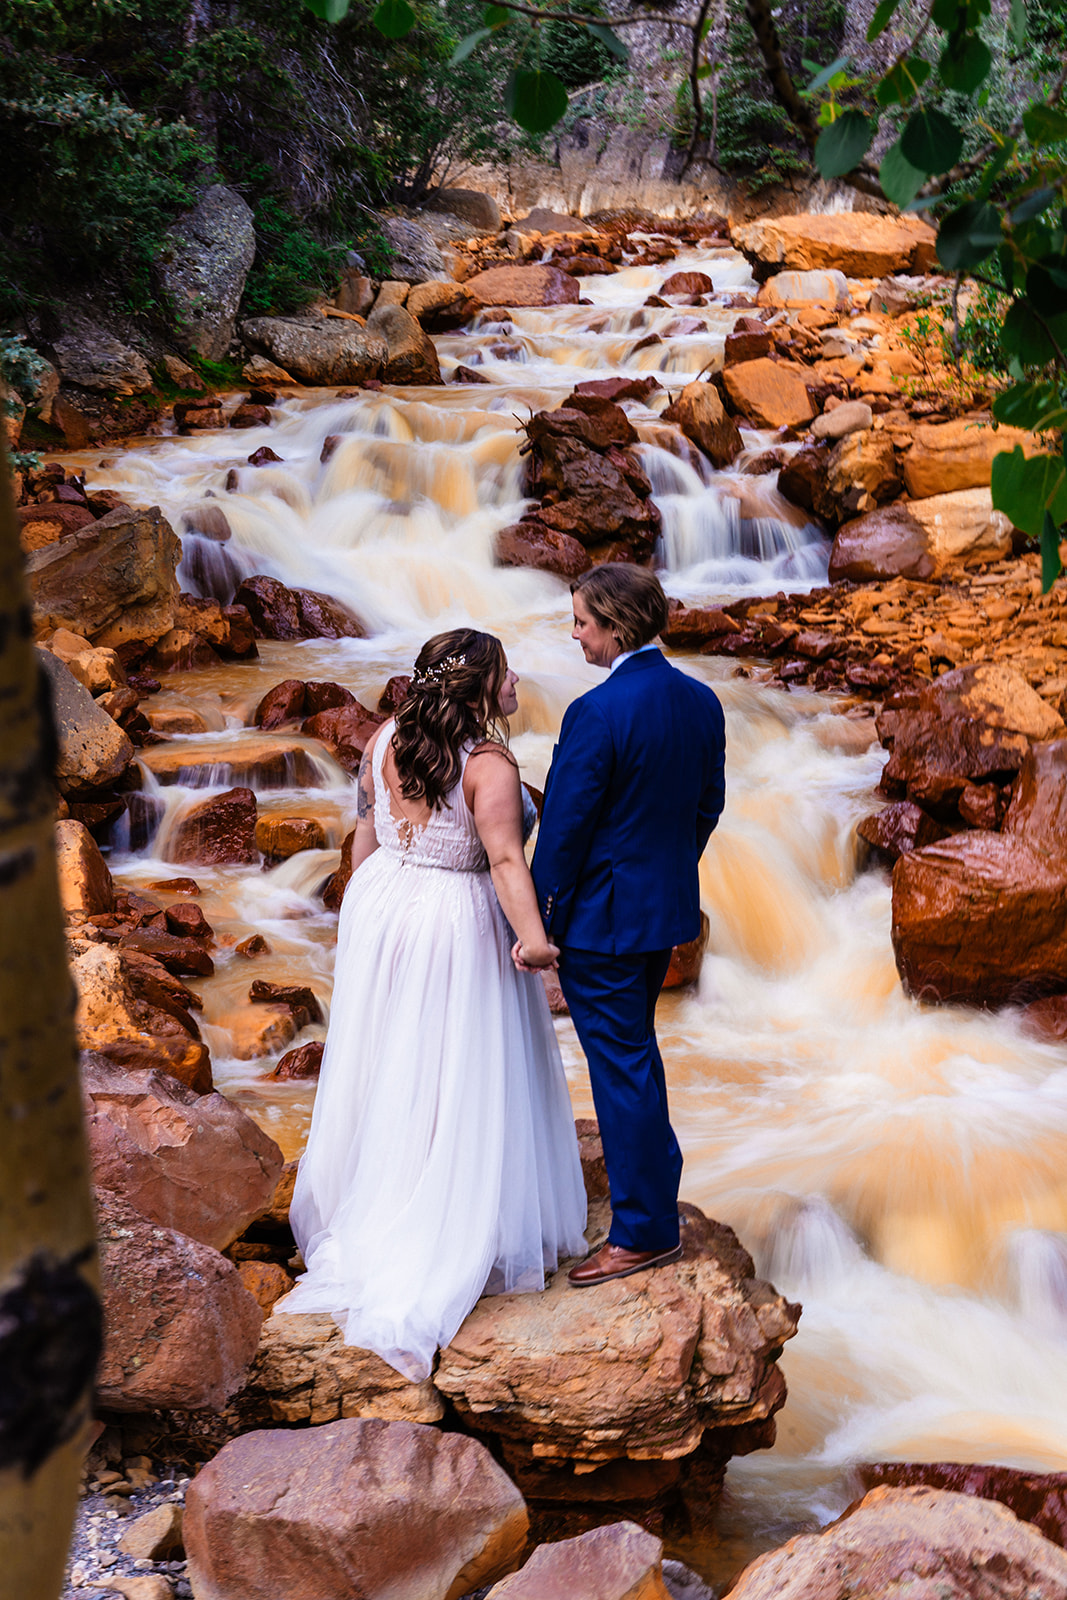 Lesbian couple looking at one another endearingly near a waterfall